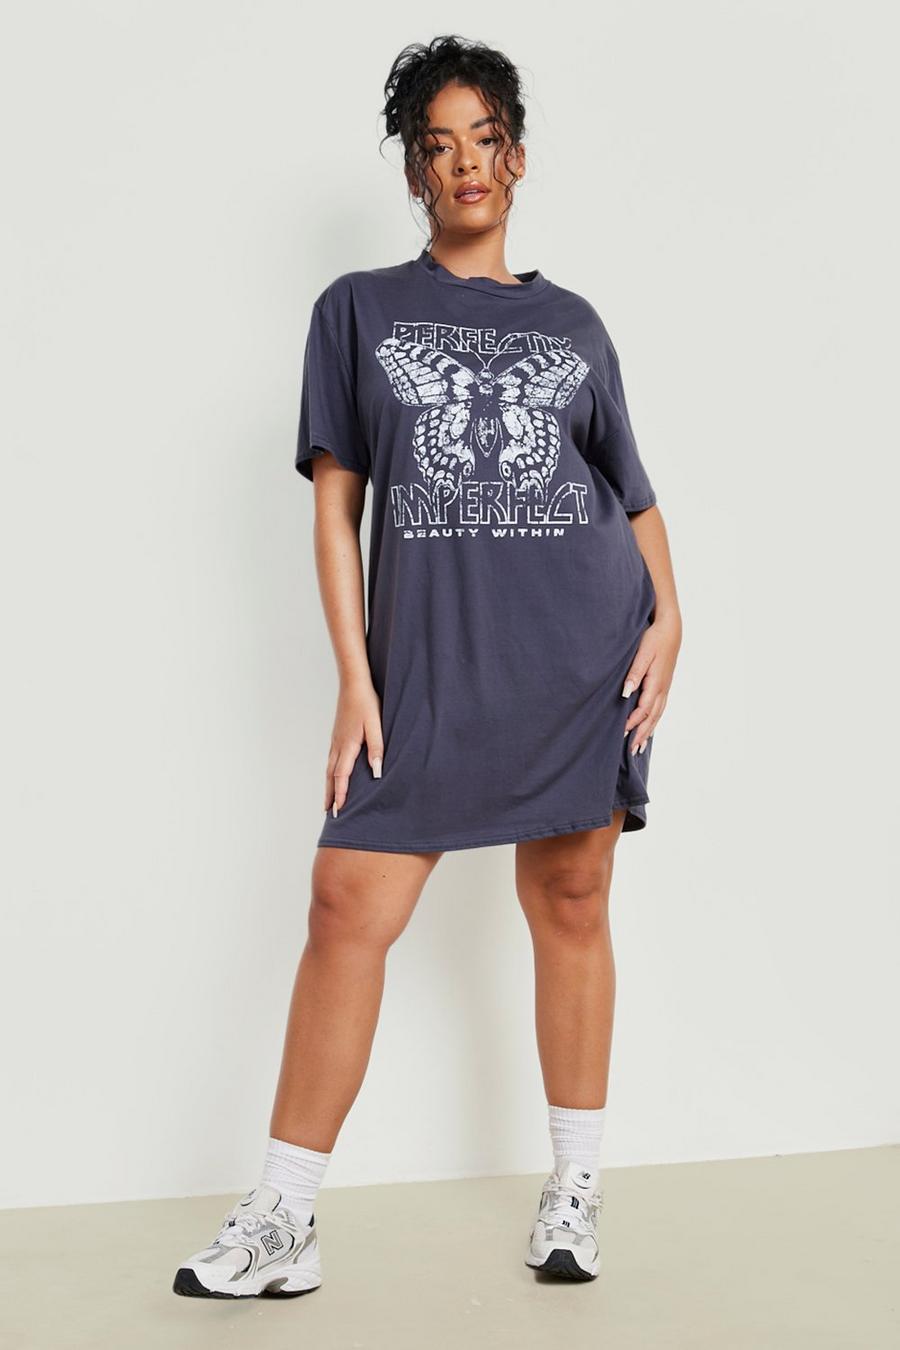 Plus T-Shirt-Kleid mit Perfectly Imperfect Slogan, Charcoal grey